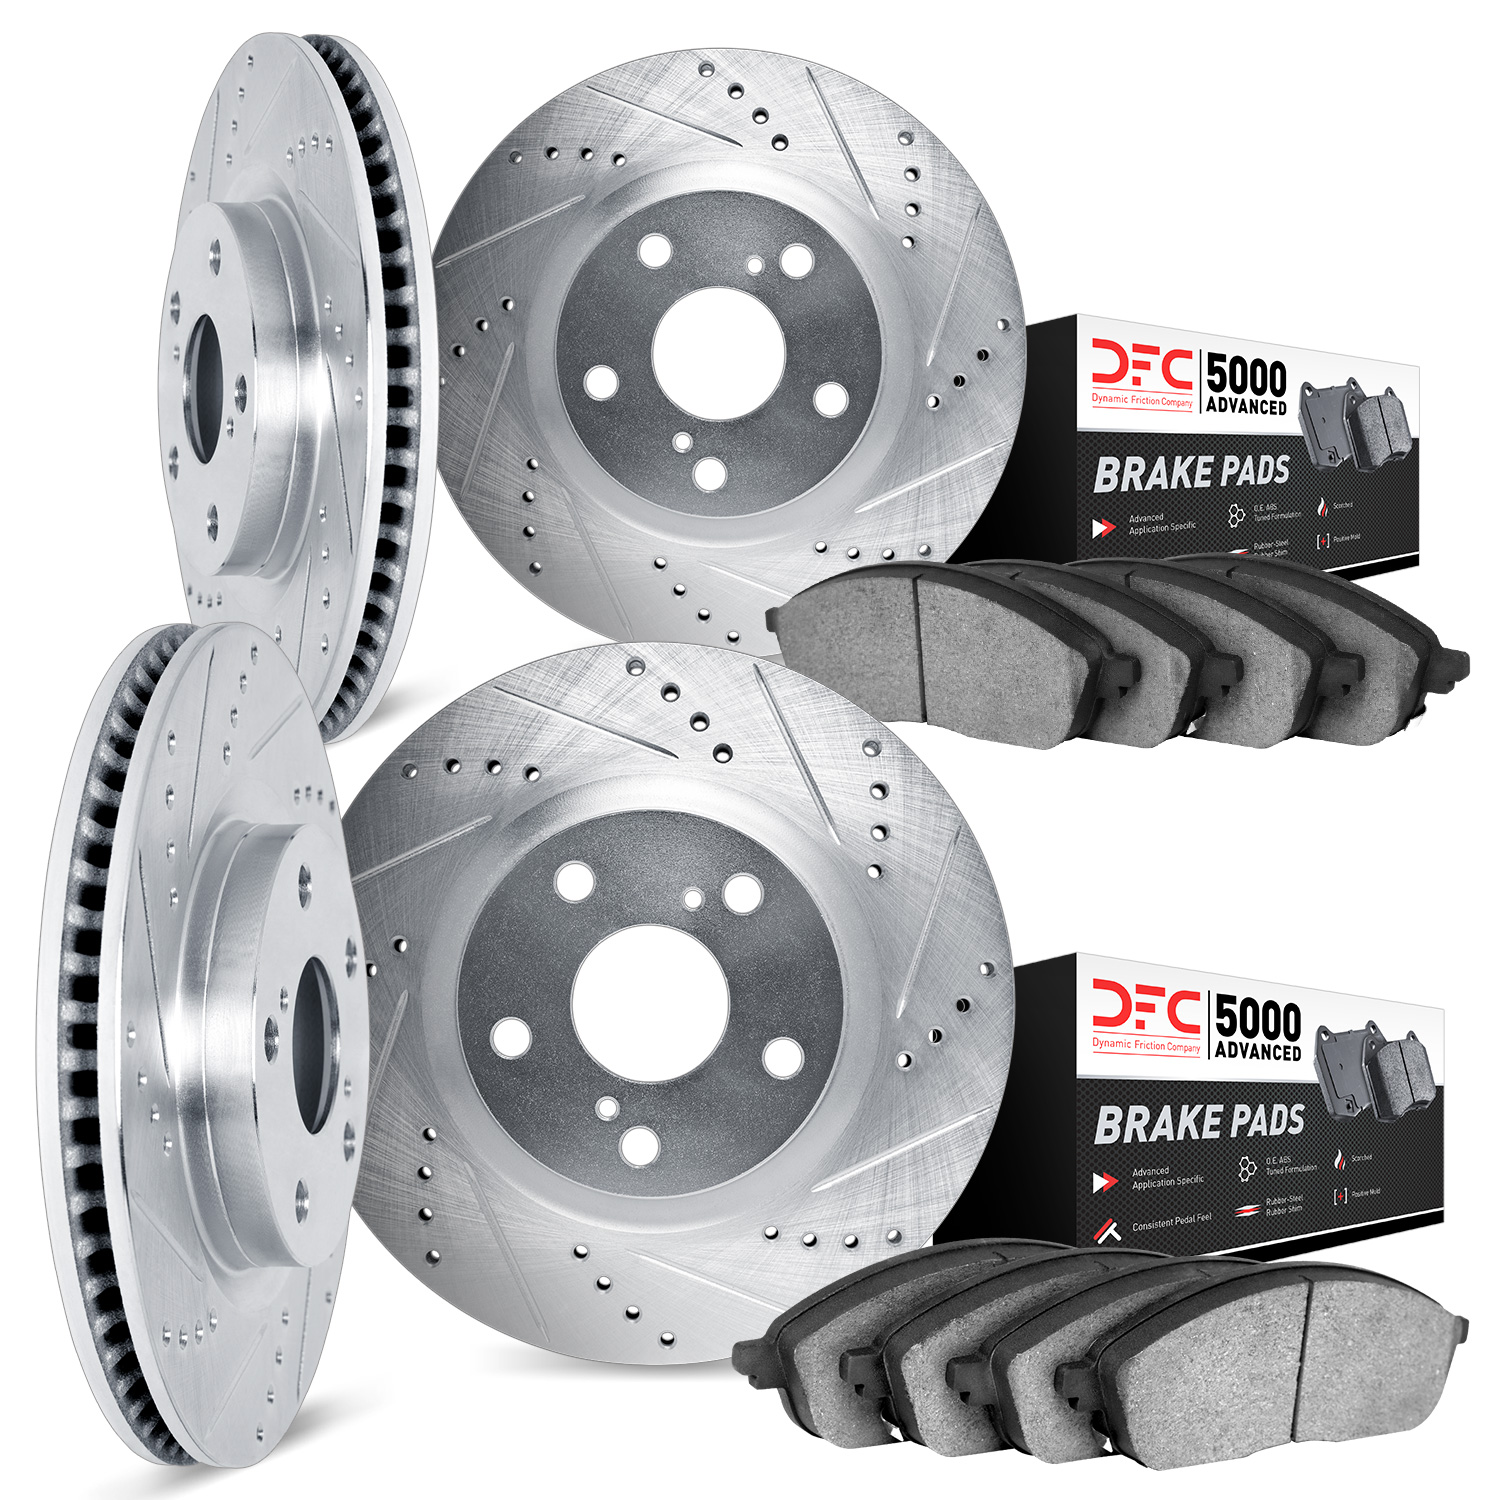 7504-54270 Drilled/Slotted Brake Rotors w/5000 Advanced Brake Pads Kit [Silver], 1993-1998 Ford/Lincoln/Mercury/Mazda, Position: